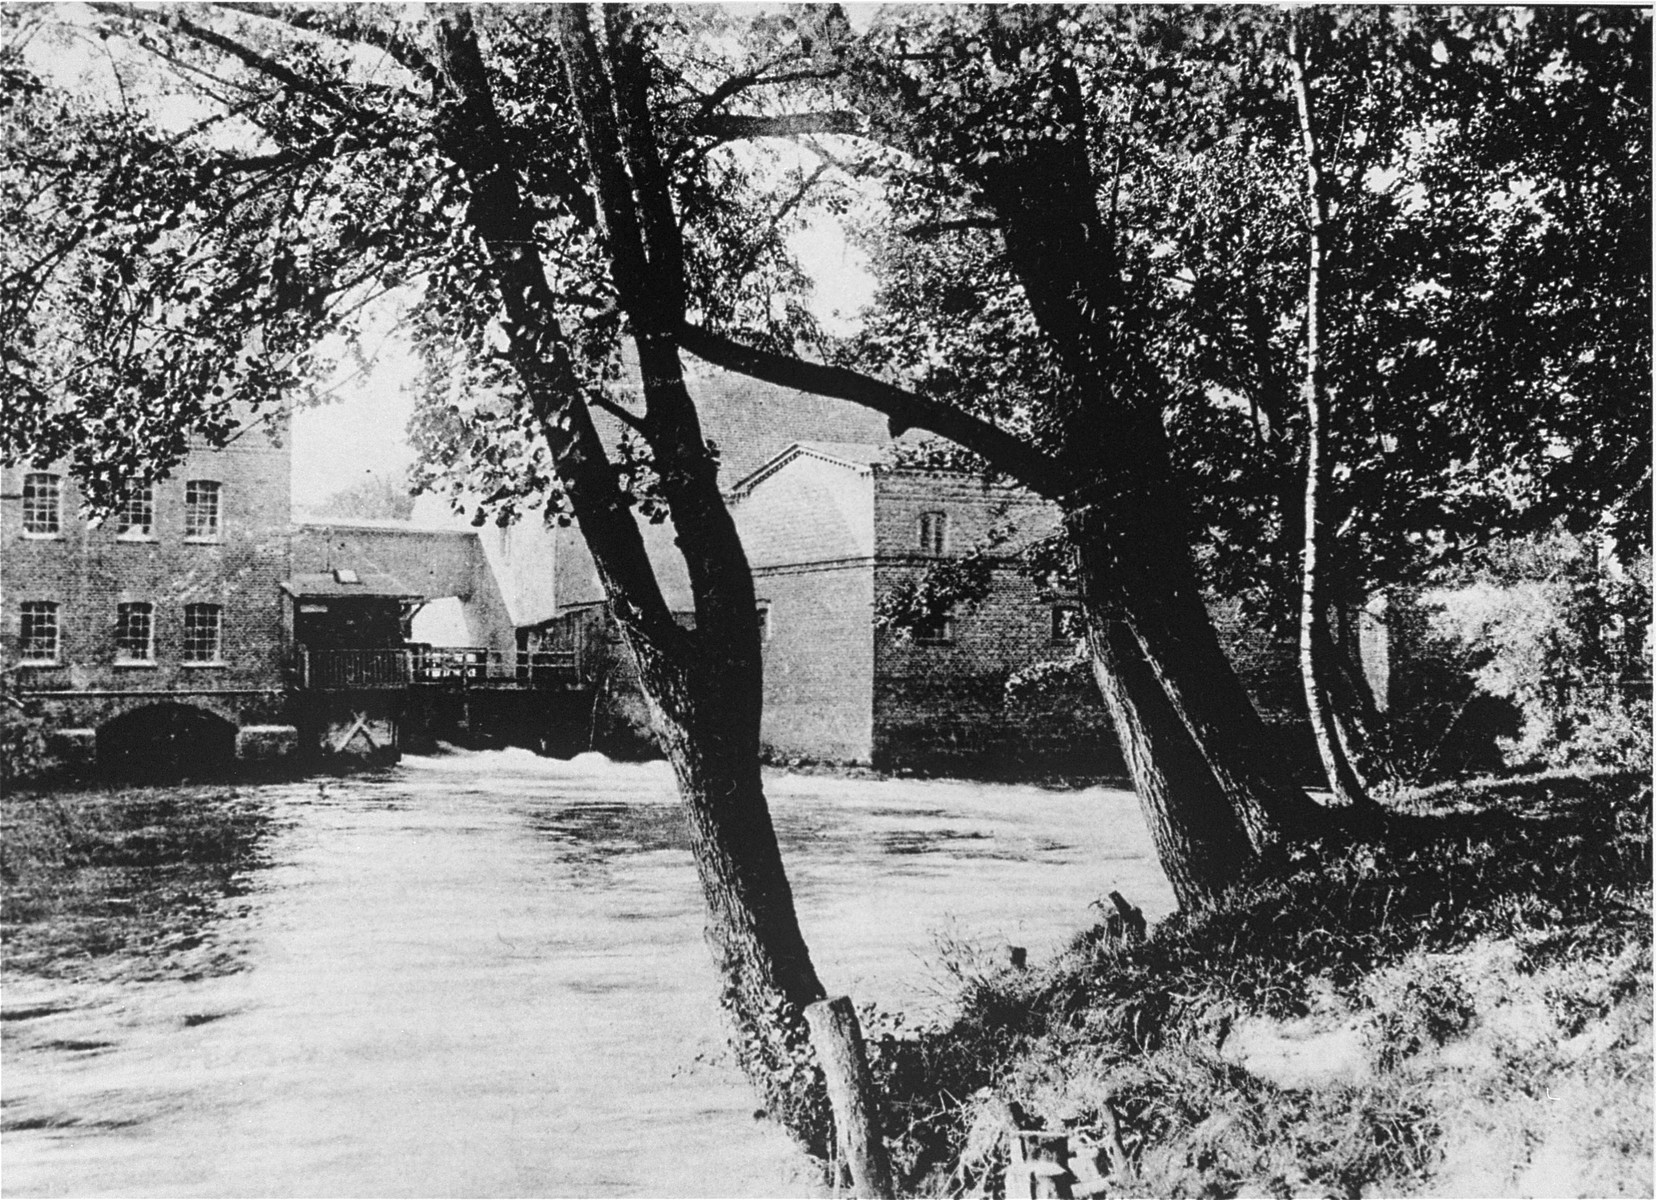 View of the Schlawer Muhlenwerke, a mill owned and operated by Hugo Gottschalk.  

The mill was founded in 1872 by Benno Gottschalk (1834-1902).  His son, Hugo, took over the mill after his death.  The mill remained in the hands of the Gottschalk family until 1923, when it was sold to the city of Schlawe.